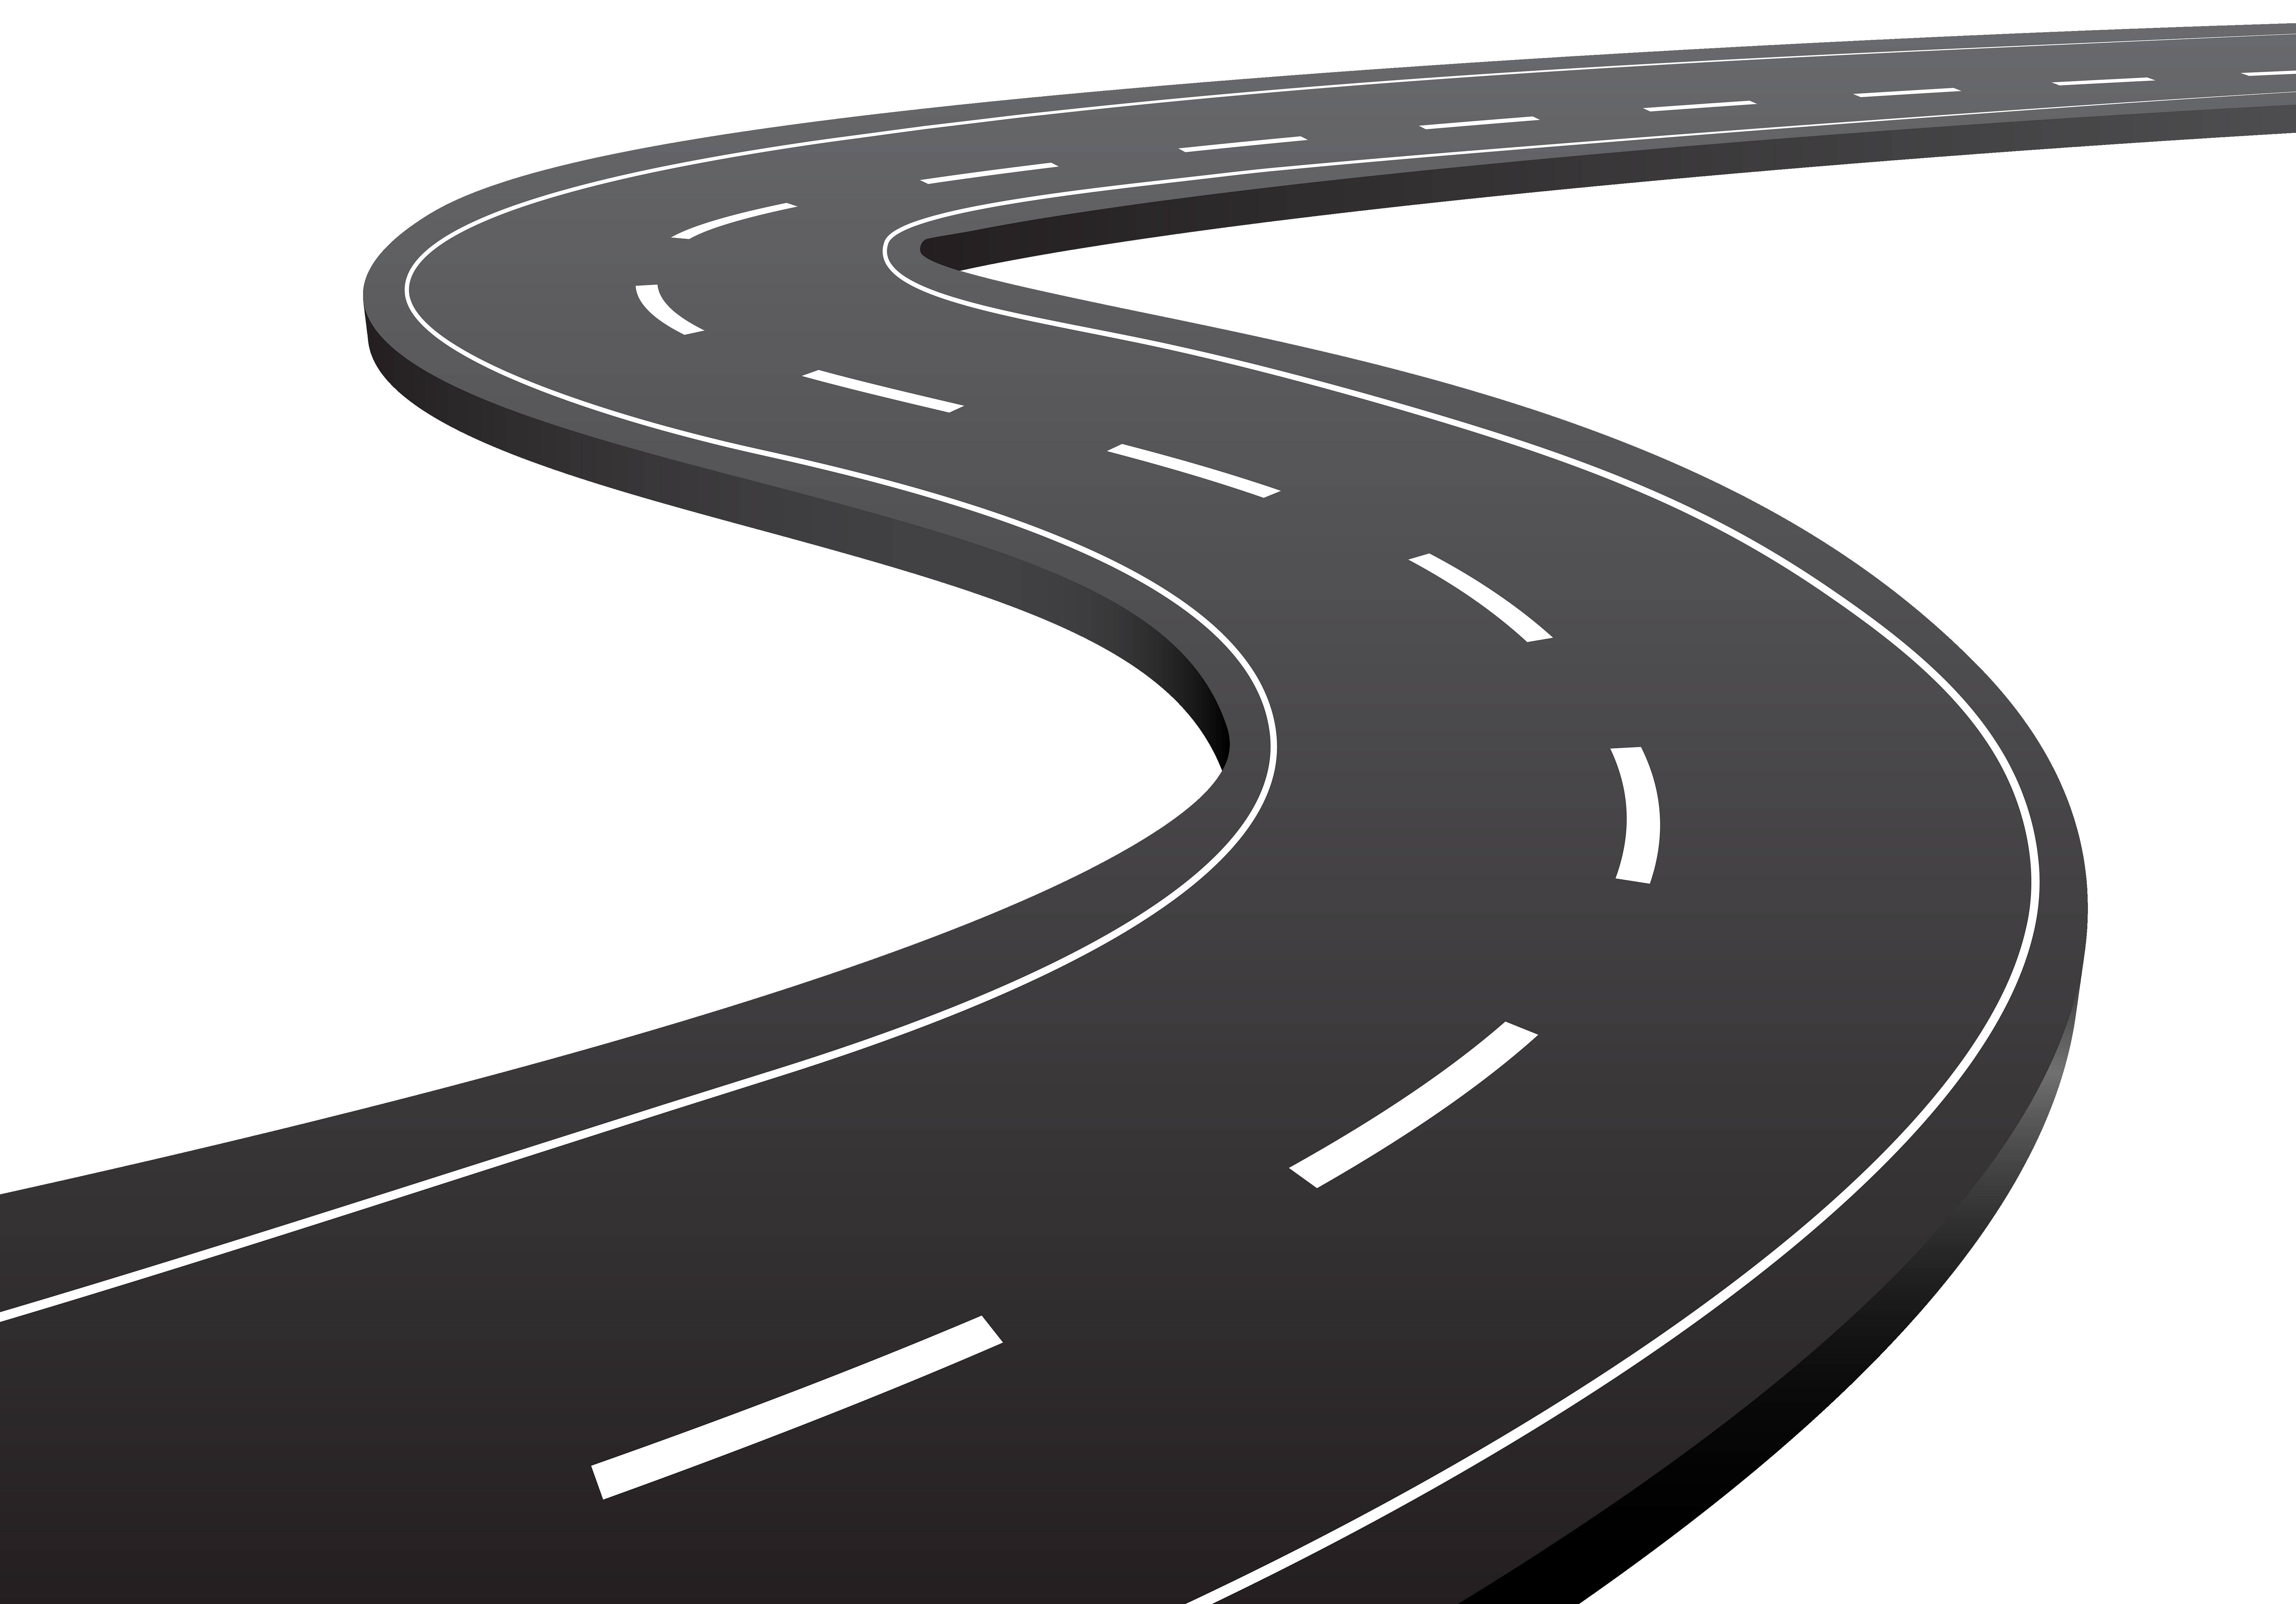 Free Roadway Clipart curved road, Download Free Clip Art on